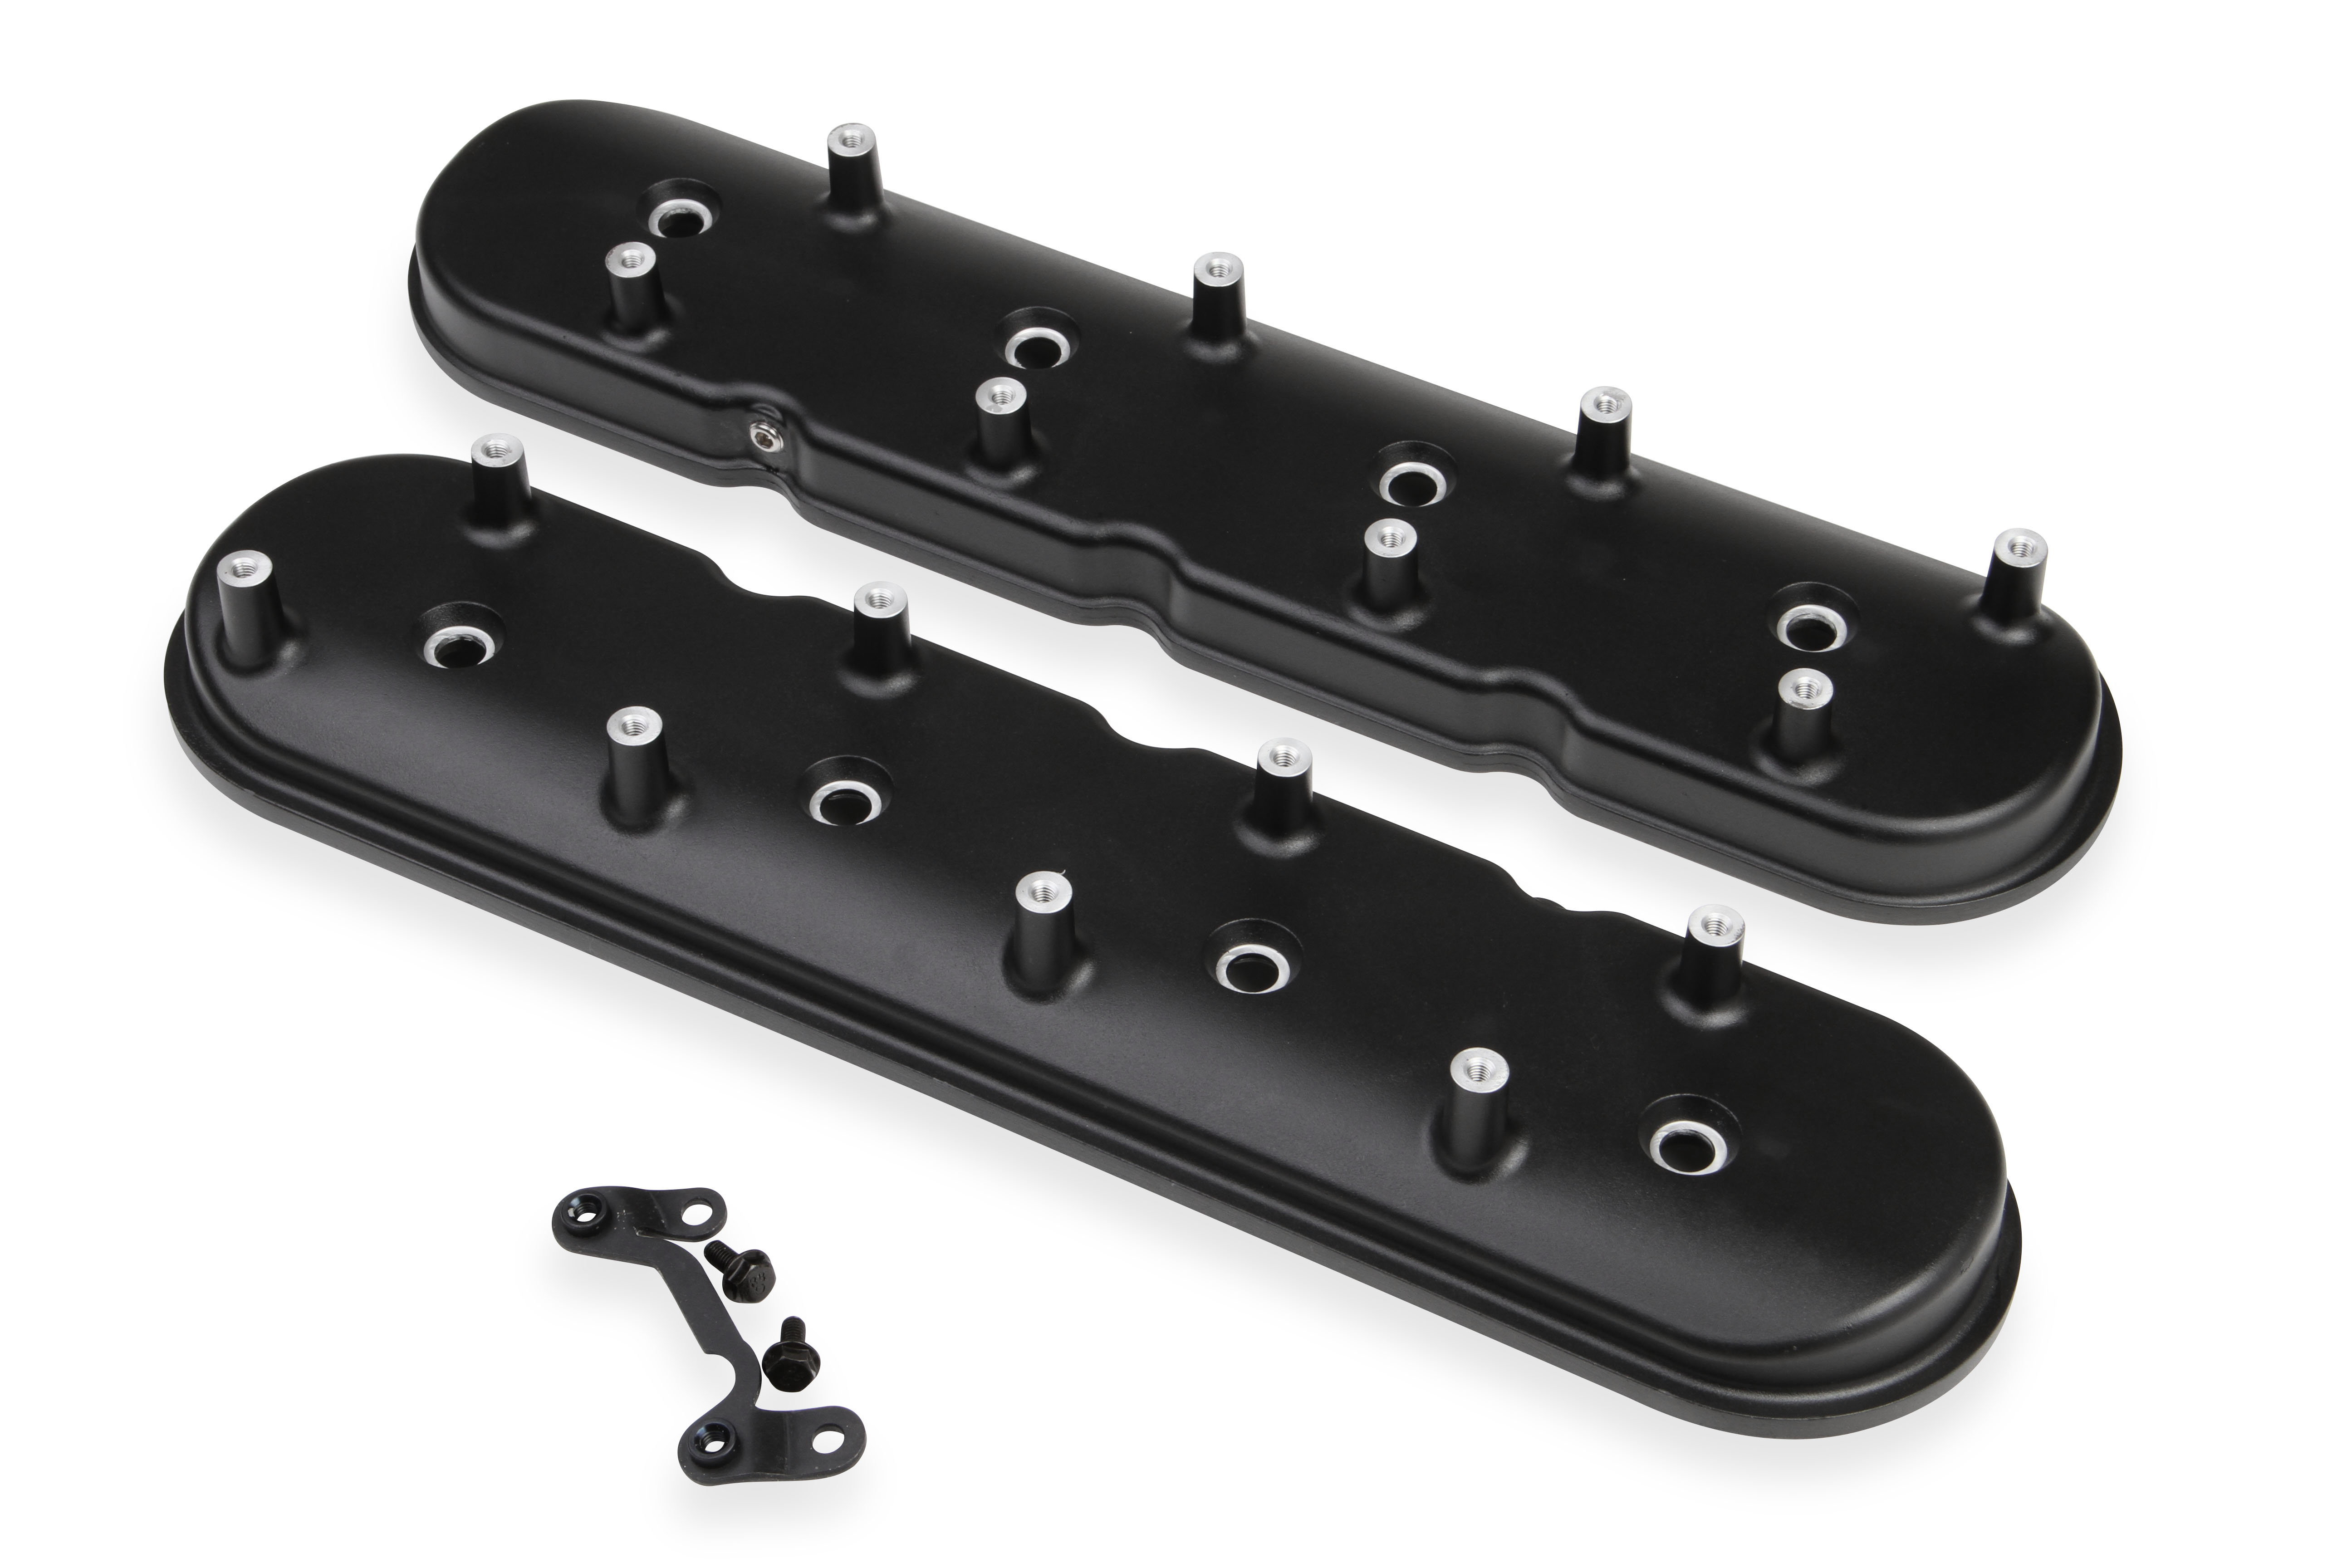 Holley LS Valve Cover - Black Krinkle (For Dry Sump Applications)